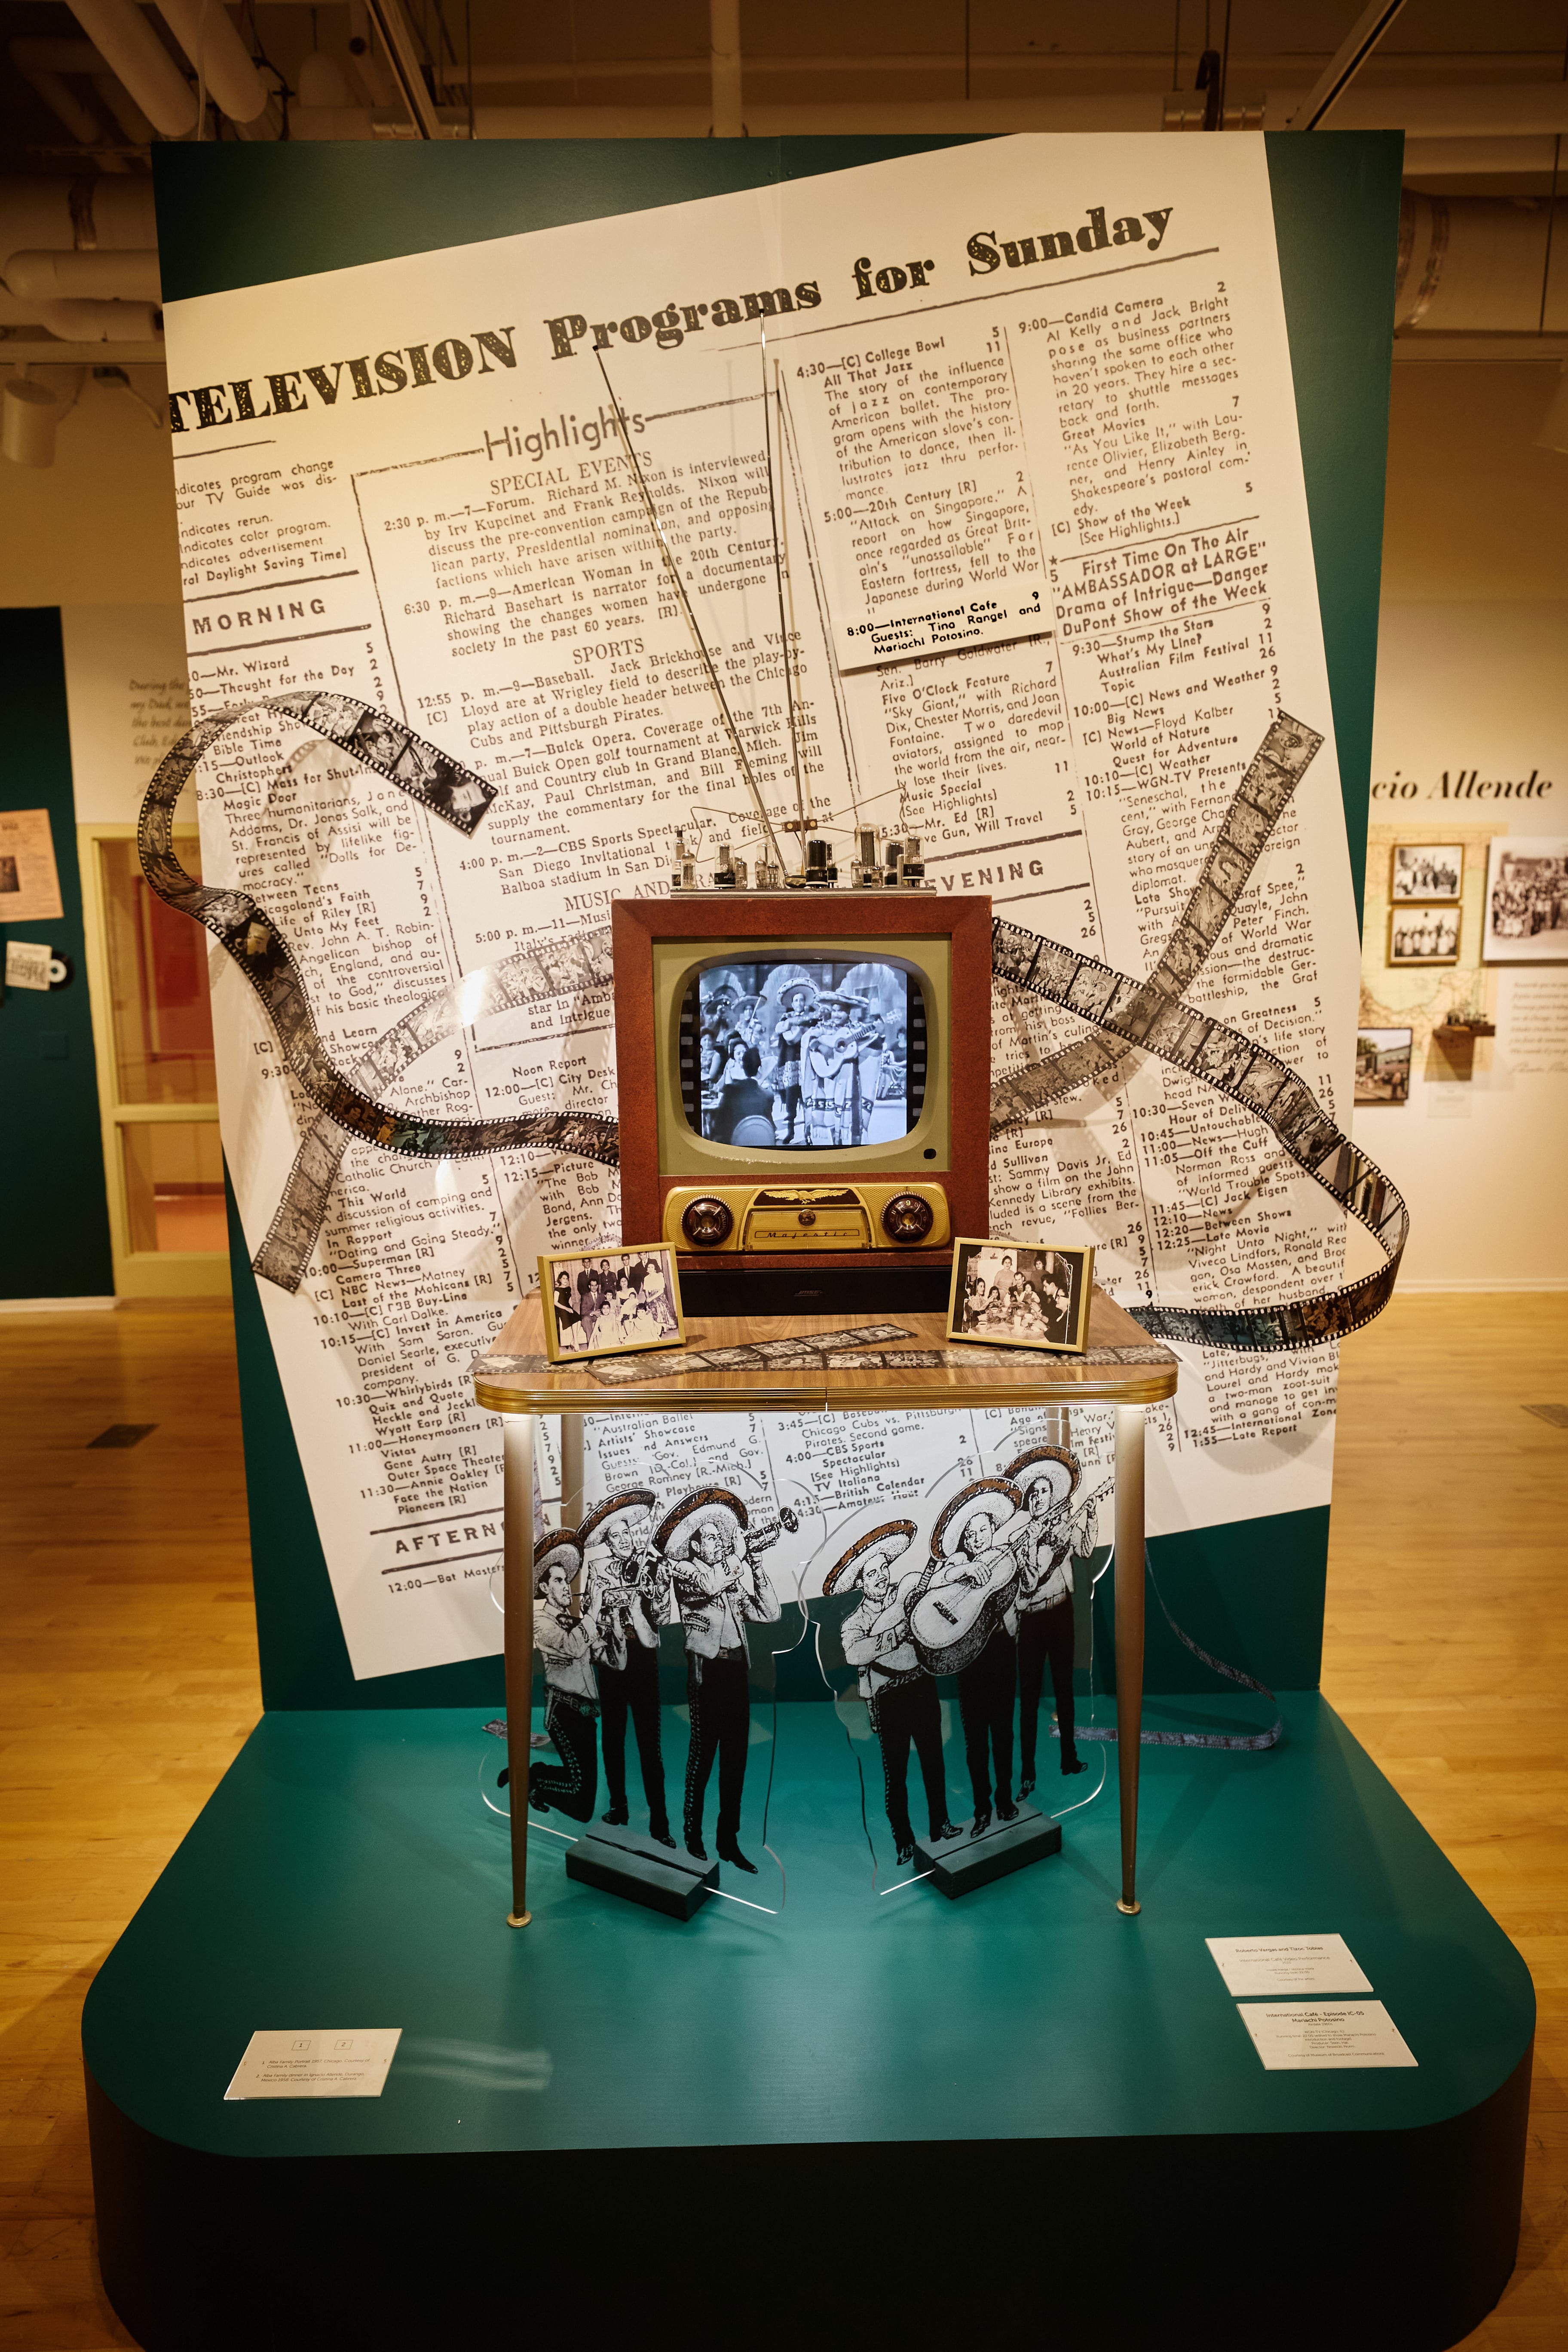 The history of traditional Mexican music in Chicago occupies a space in the exhibition halls.